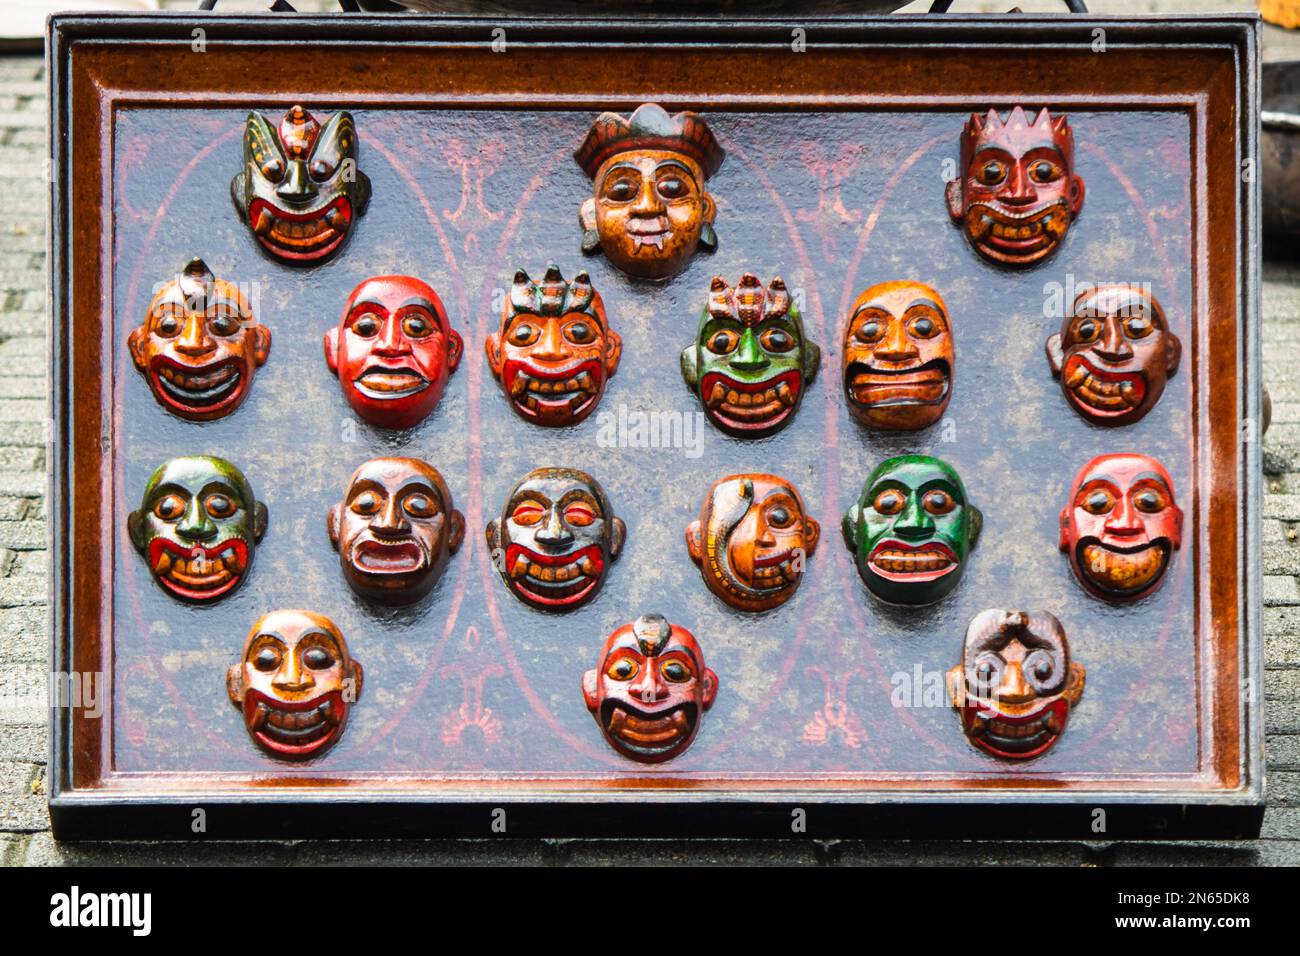 The Daha Ata Sanniya masks are essential accessories of ancient dance ritual in Sri Lanka, also known as devil dance. Its purpose is healing and bless. Stock Photo